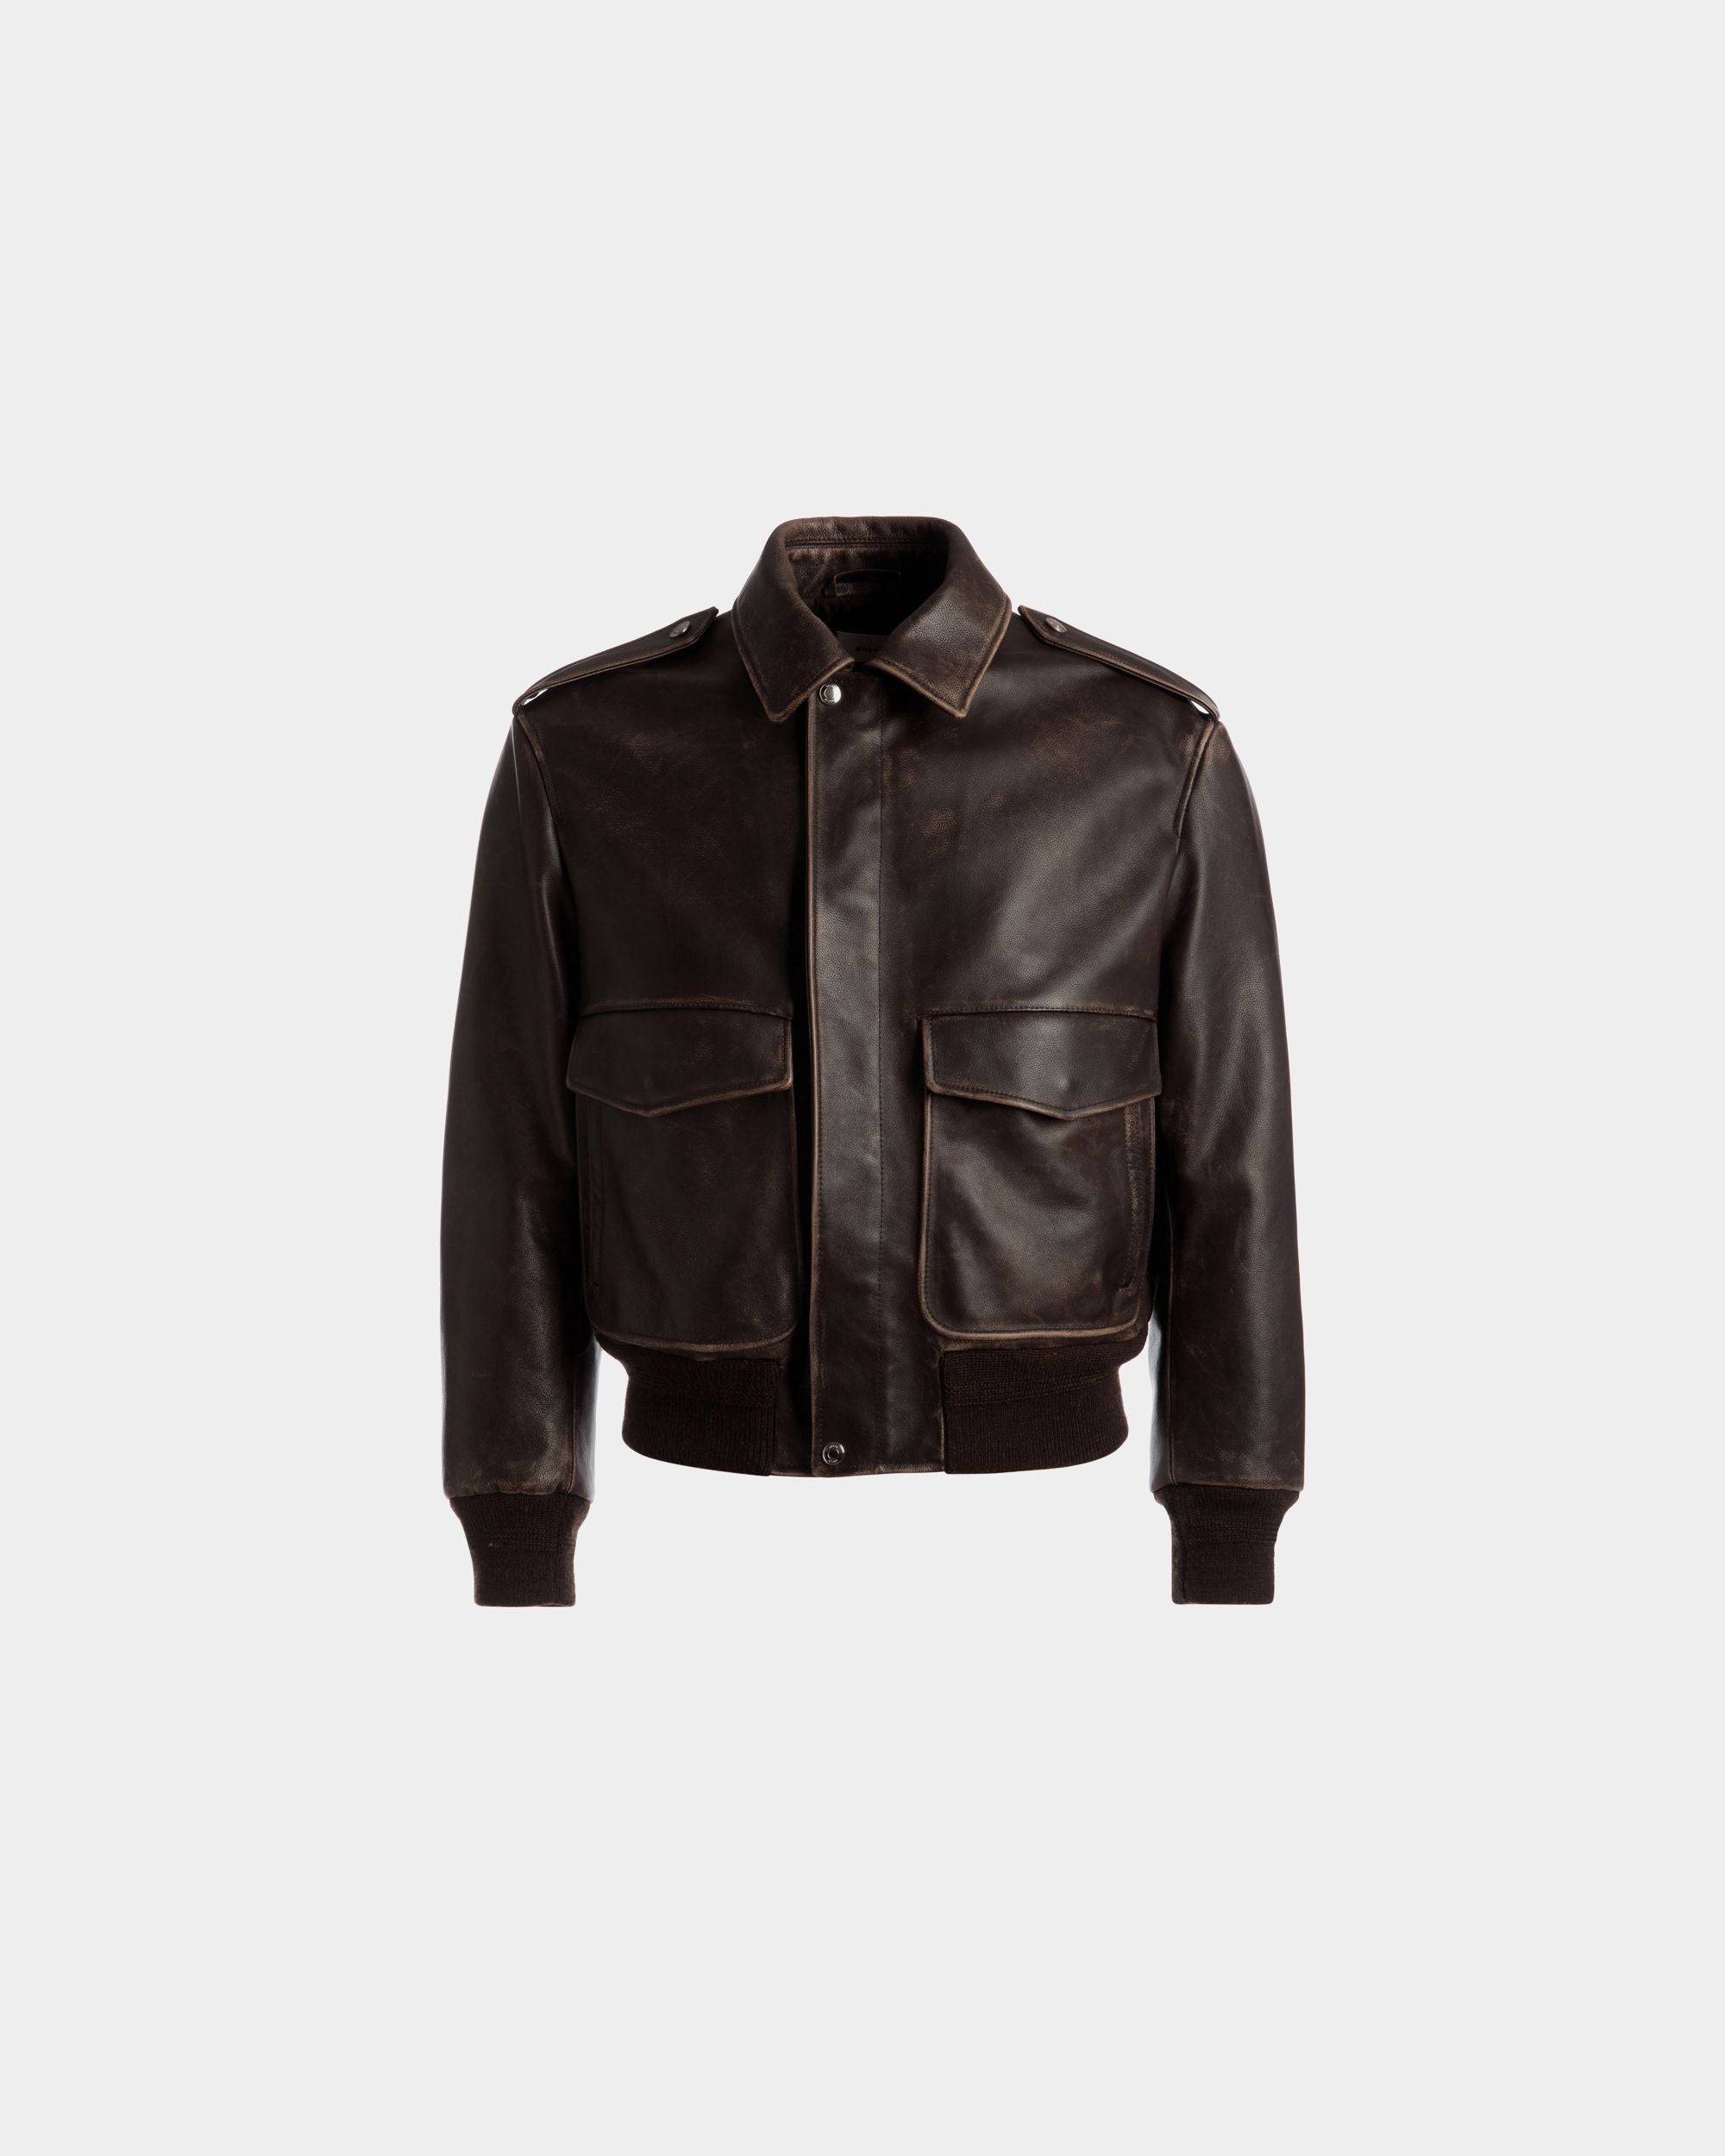 Men's Bomber Jacket In Brown Leather | Bally | Still Life Front